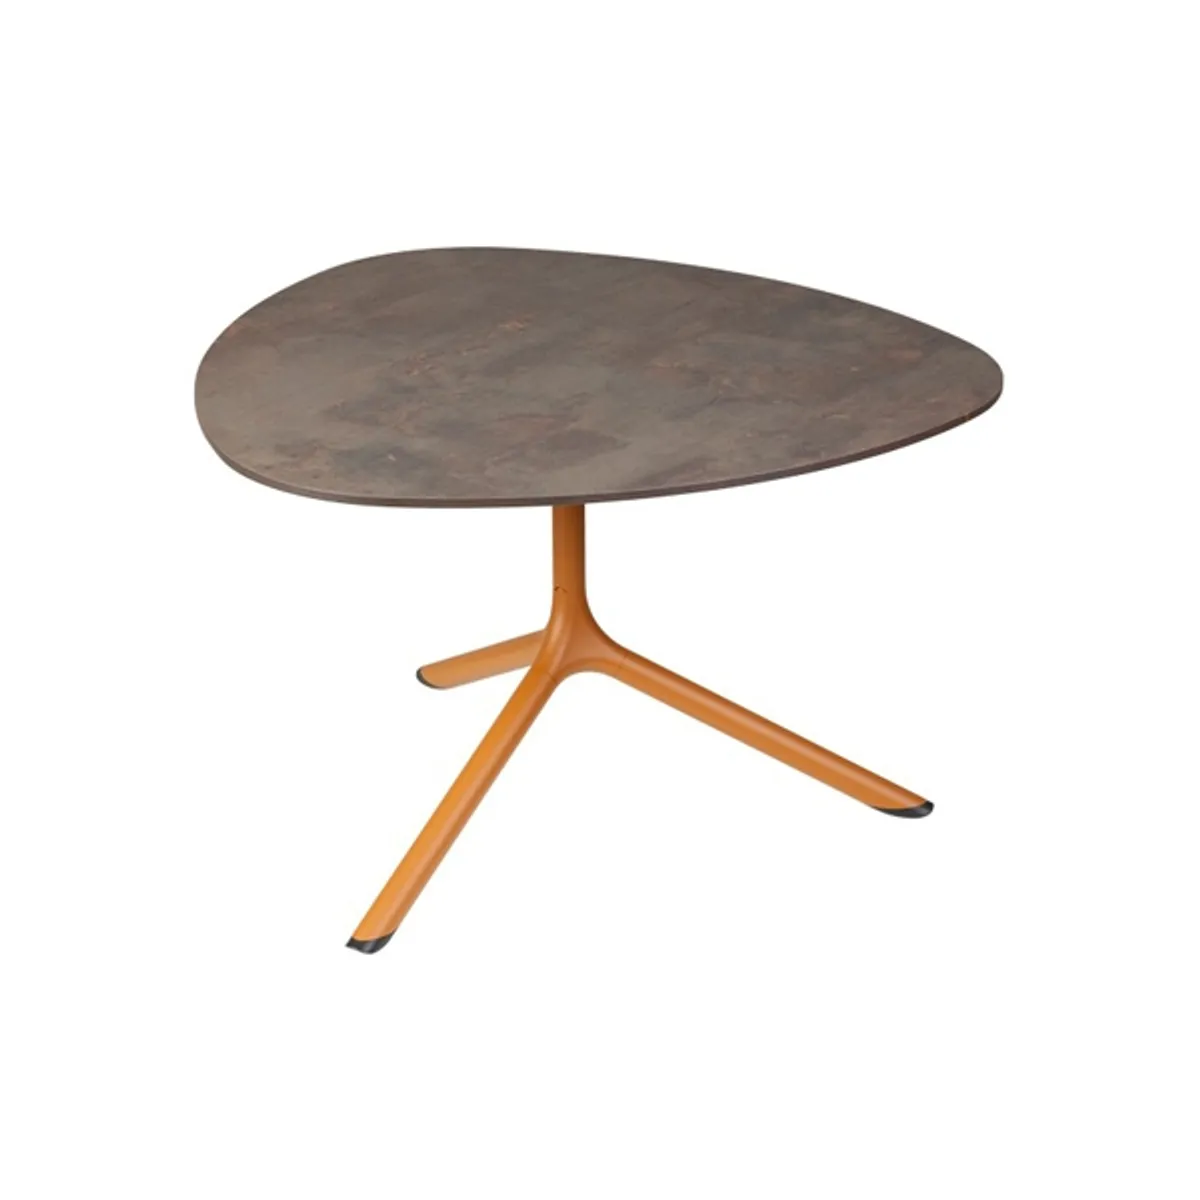 Trinette triangular table Inside Out Contracts2